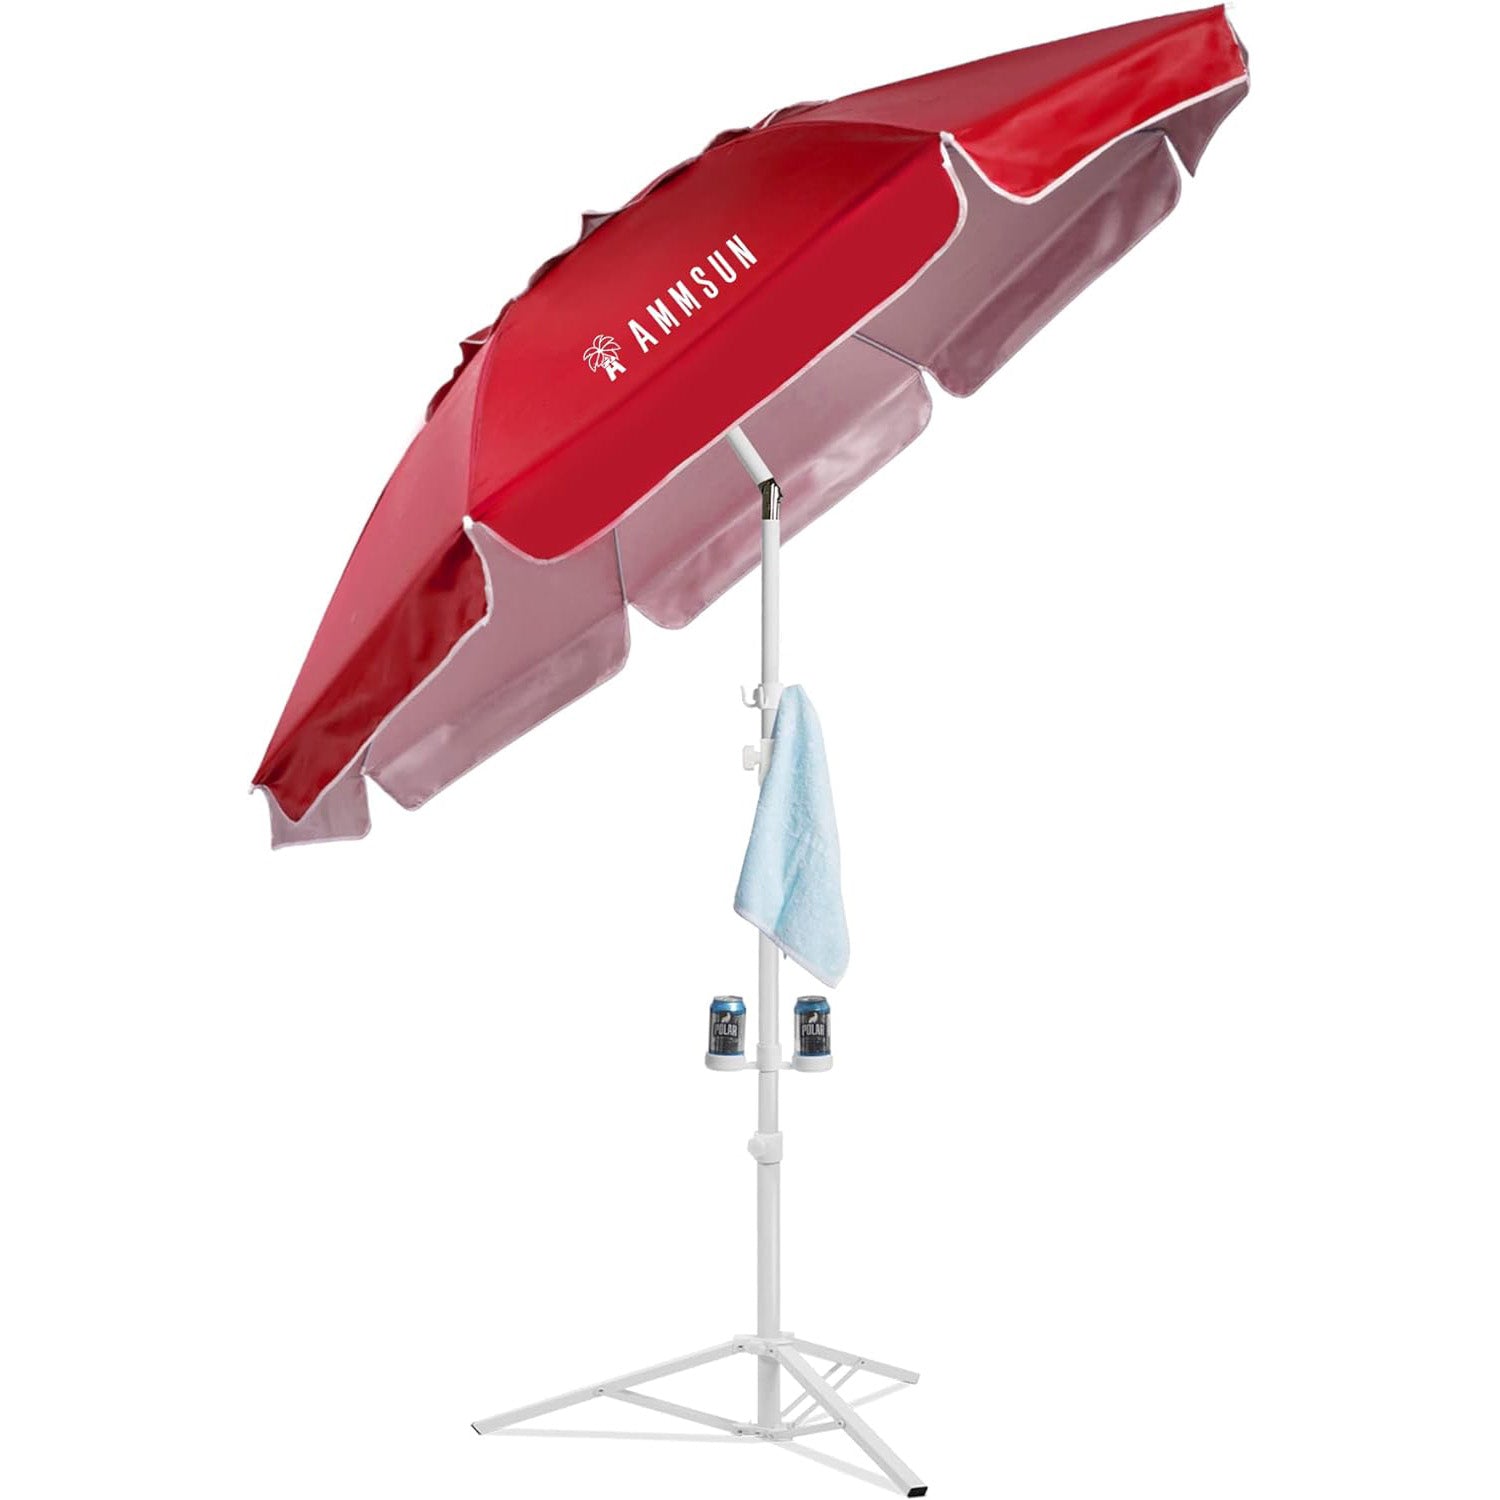 AMMSUN 6.5ft Lightweight Portable Sports Umbrella with Stand Red